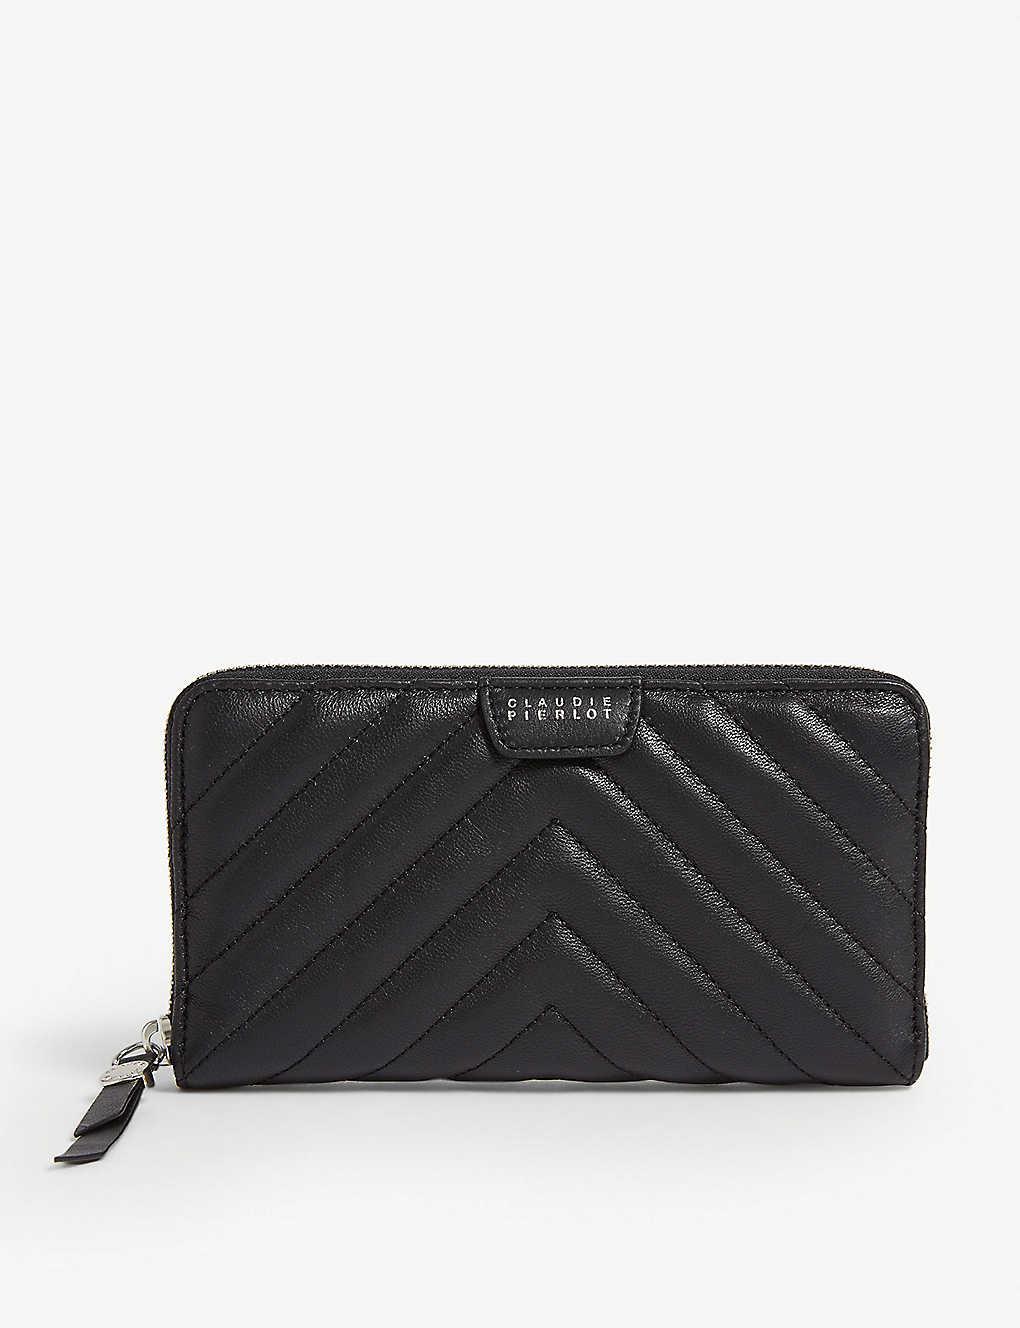 Claudie Pierlot Angie Quilted Leather Wallet in Black | Lyst